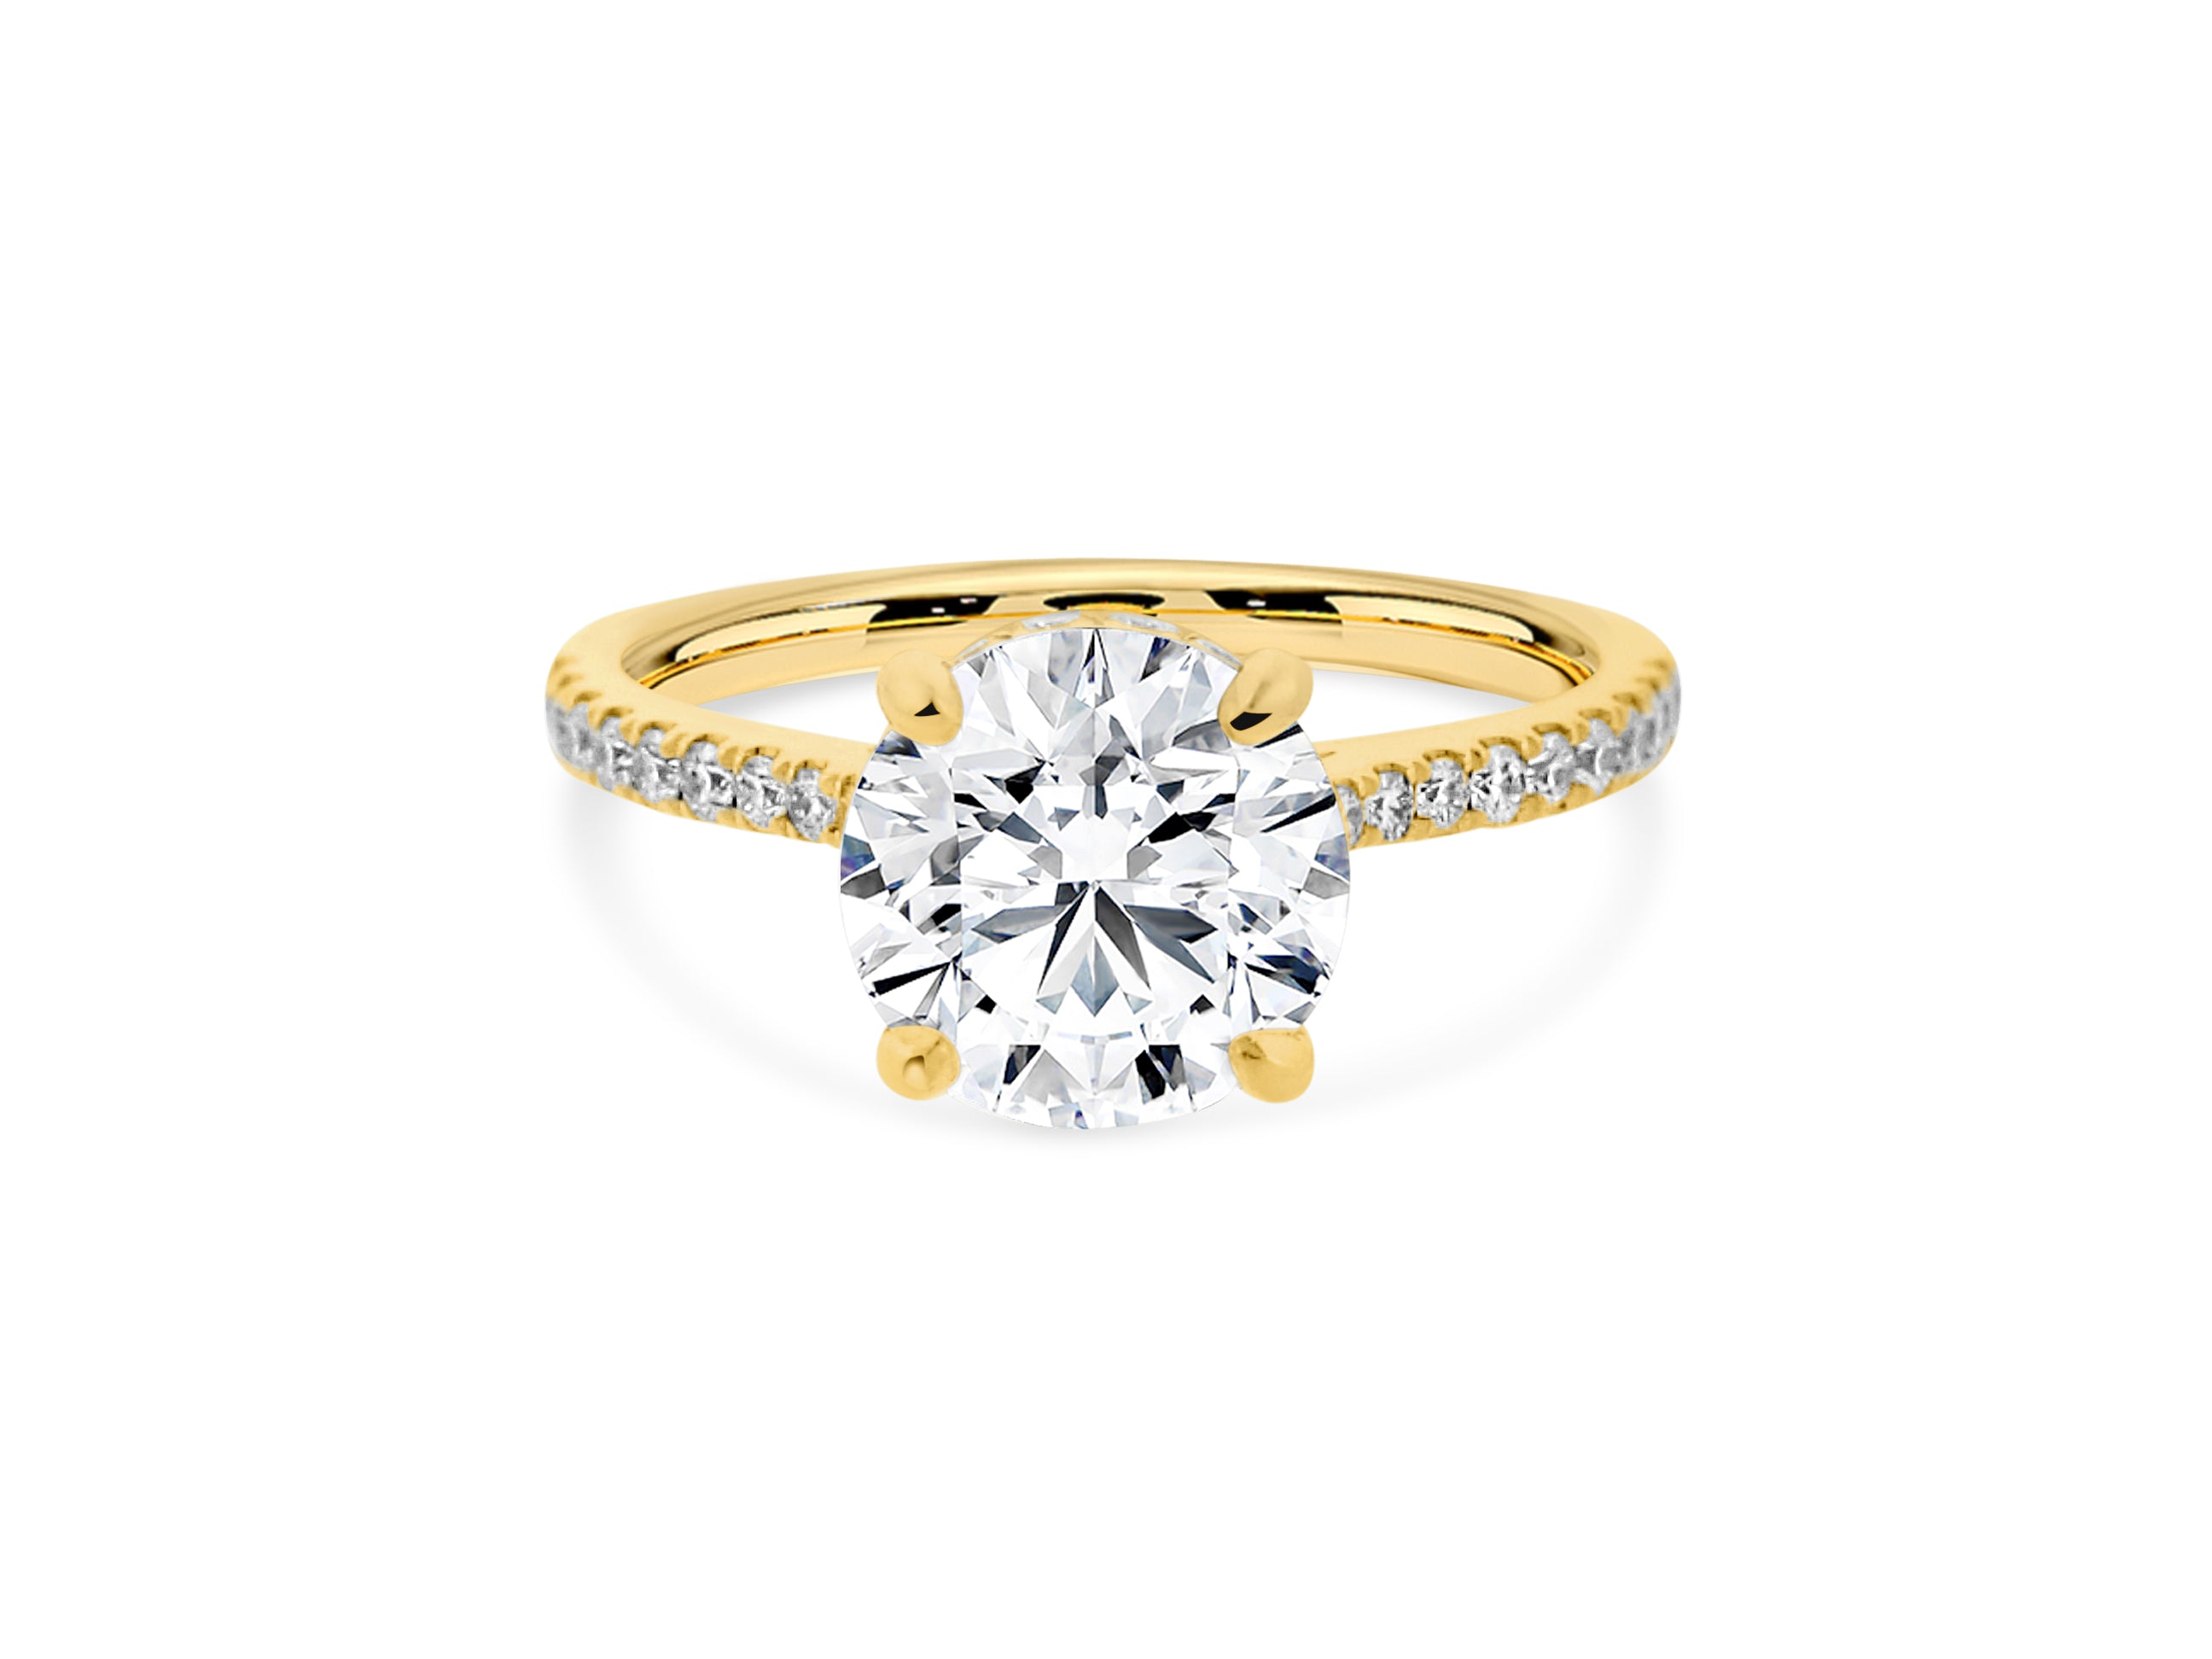 PRIVE' 18K YELLOW GOLD 2.22CT VS2 CLARITY AND F COLOR ROUND SWAROVSKI LAB GROWN XXX DIAMOND - CERTIFIED AND SURROUNDED BY .36CT VS/F-G NATURAL DIAMONDS